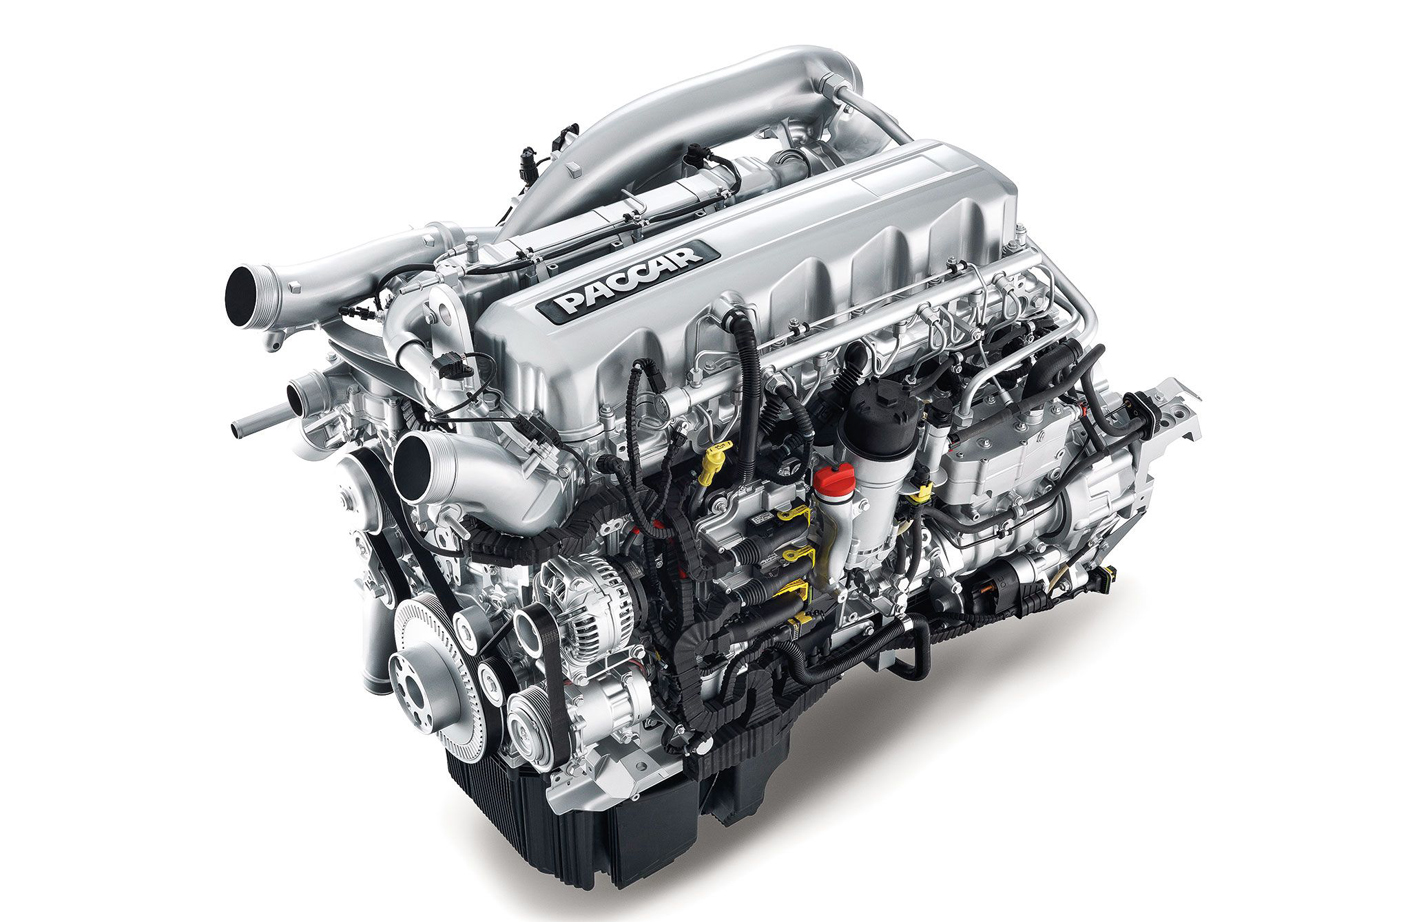 The Paccar MX-13 diesel engine is built for large trucks and employs many new technologies to comply with Euro VI emissions standards. A two-stage fuel filter system employs Cummins NanoNet nonwoven filter media to provide high flow rates while filtering out 99% of particles as small as 4-microns.